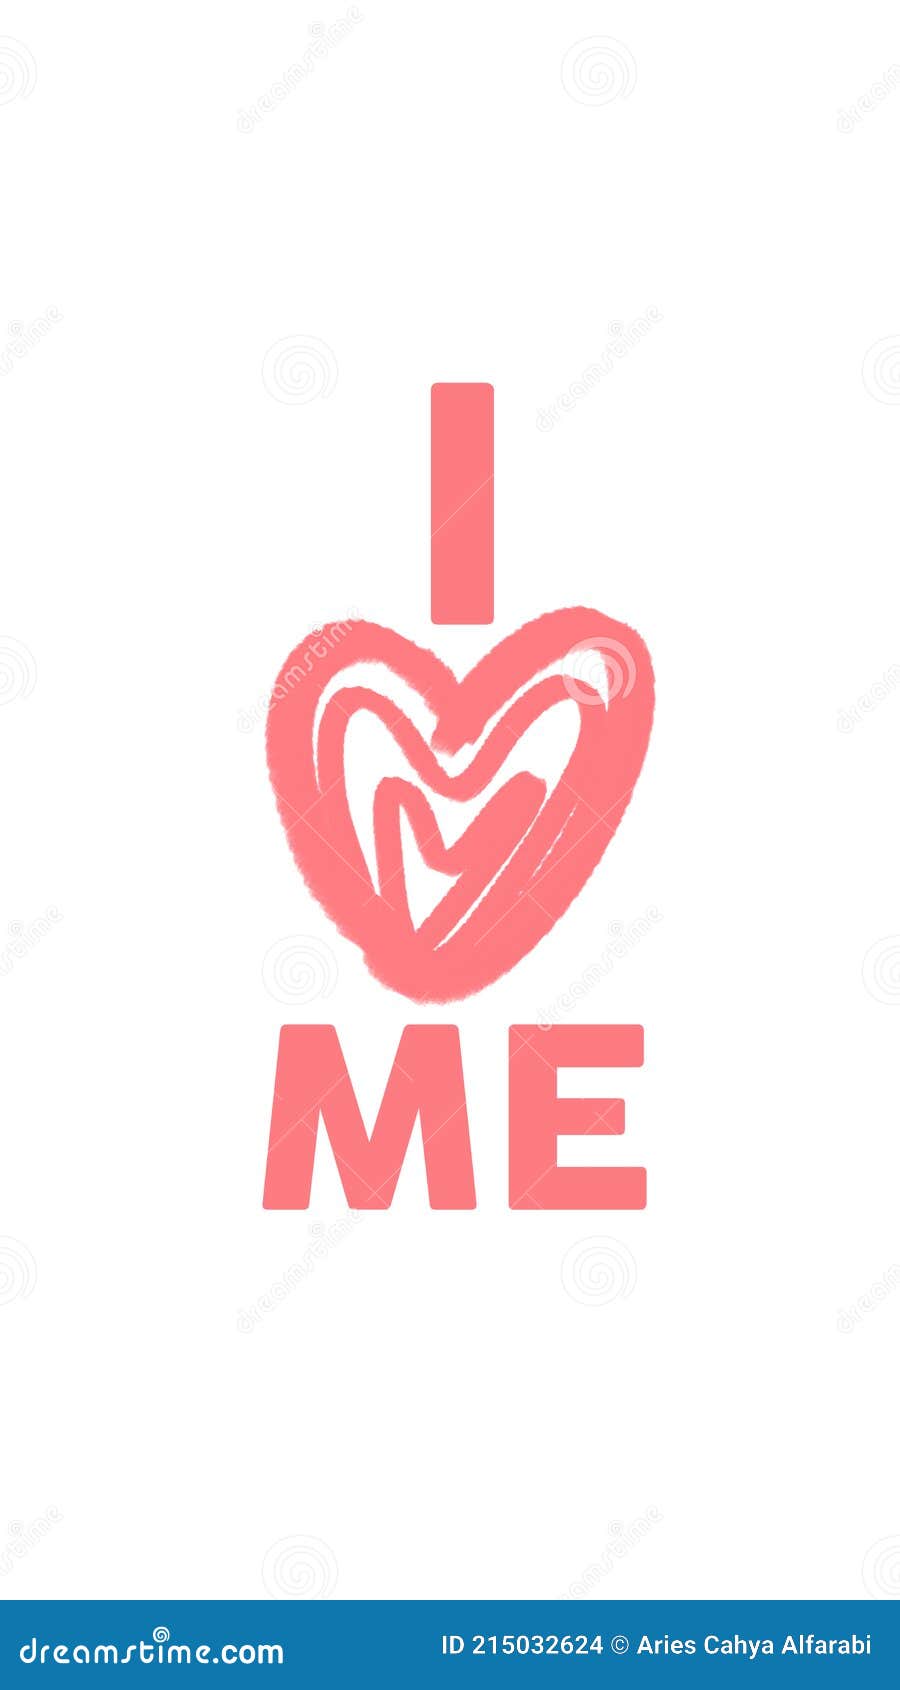 I Love Me Quotes Wallpaper Background Self Love Stock Illustration